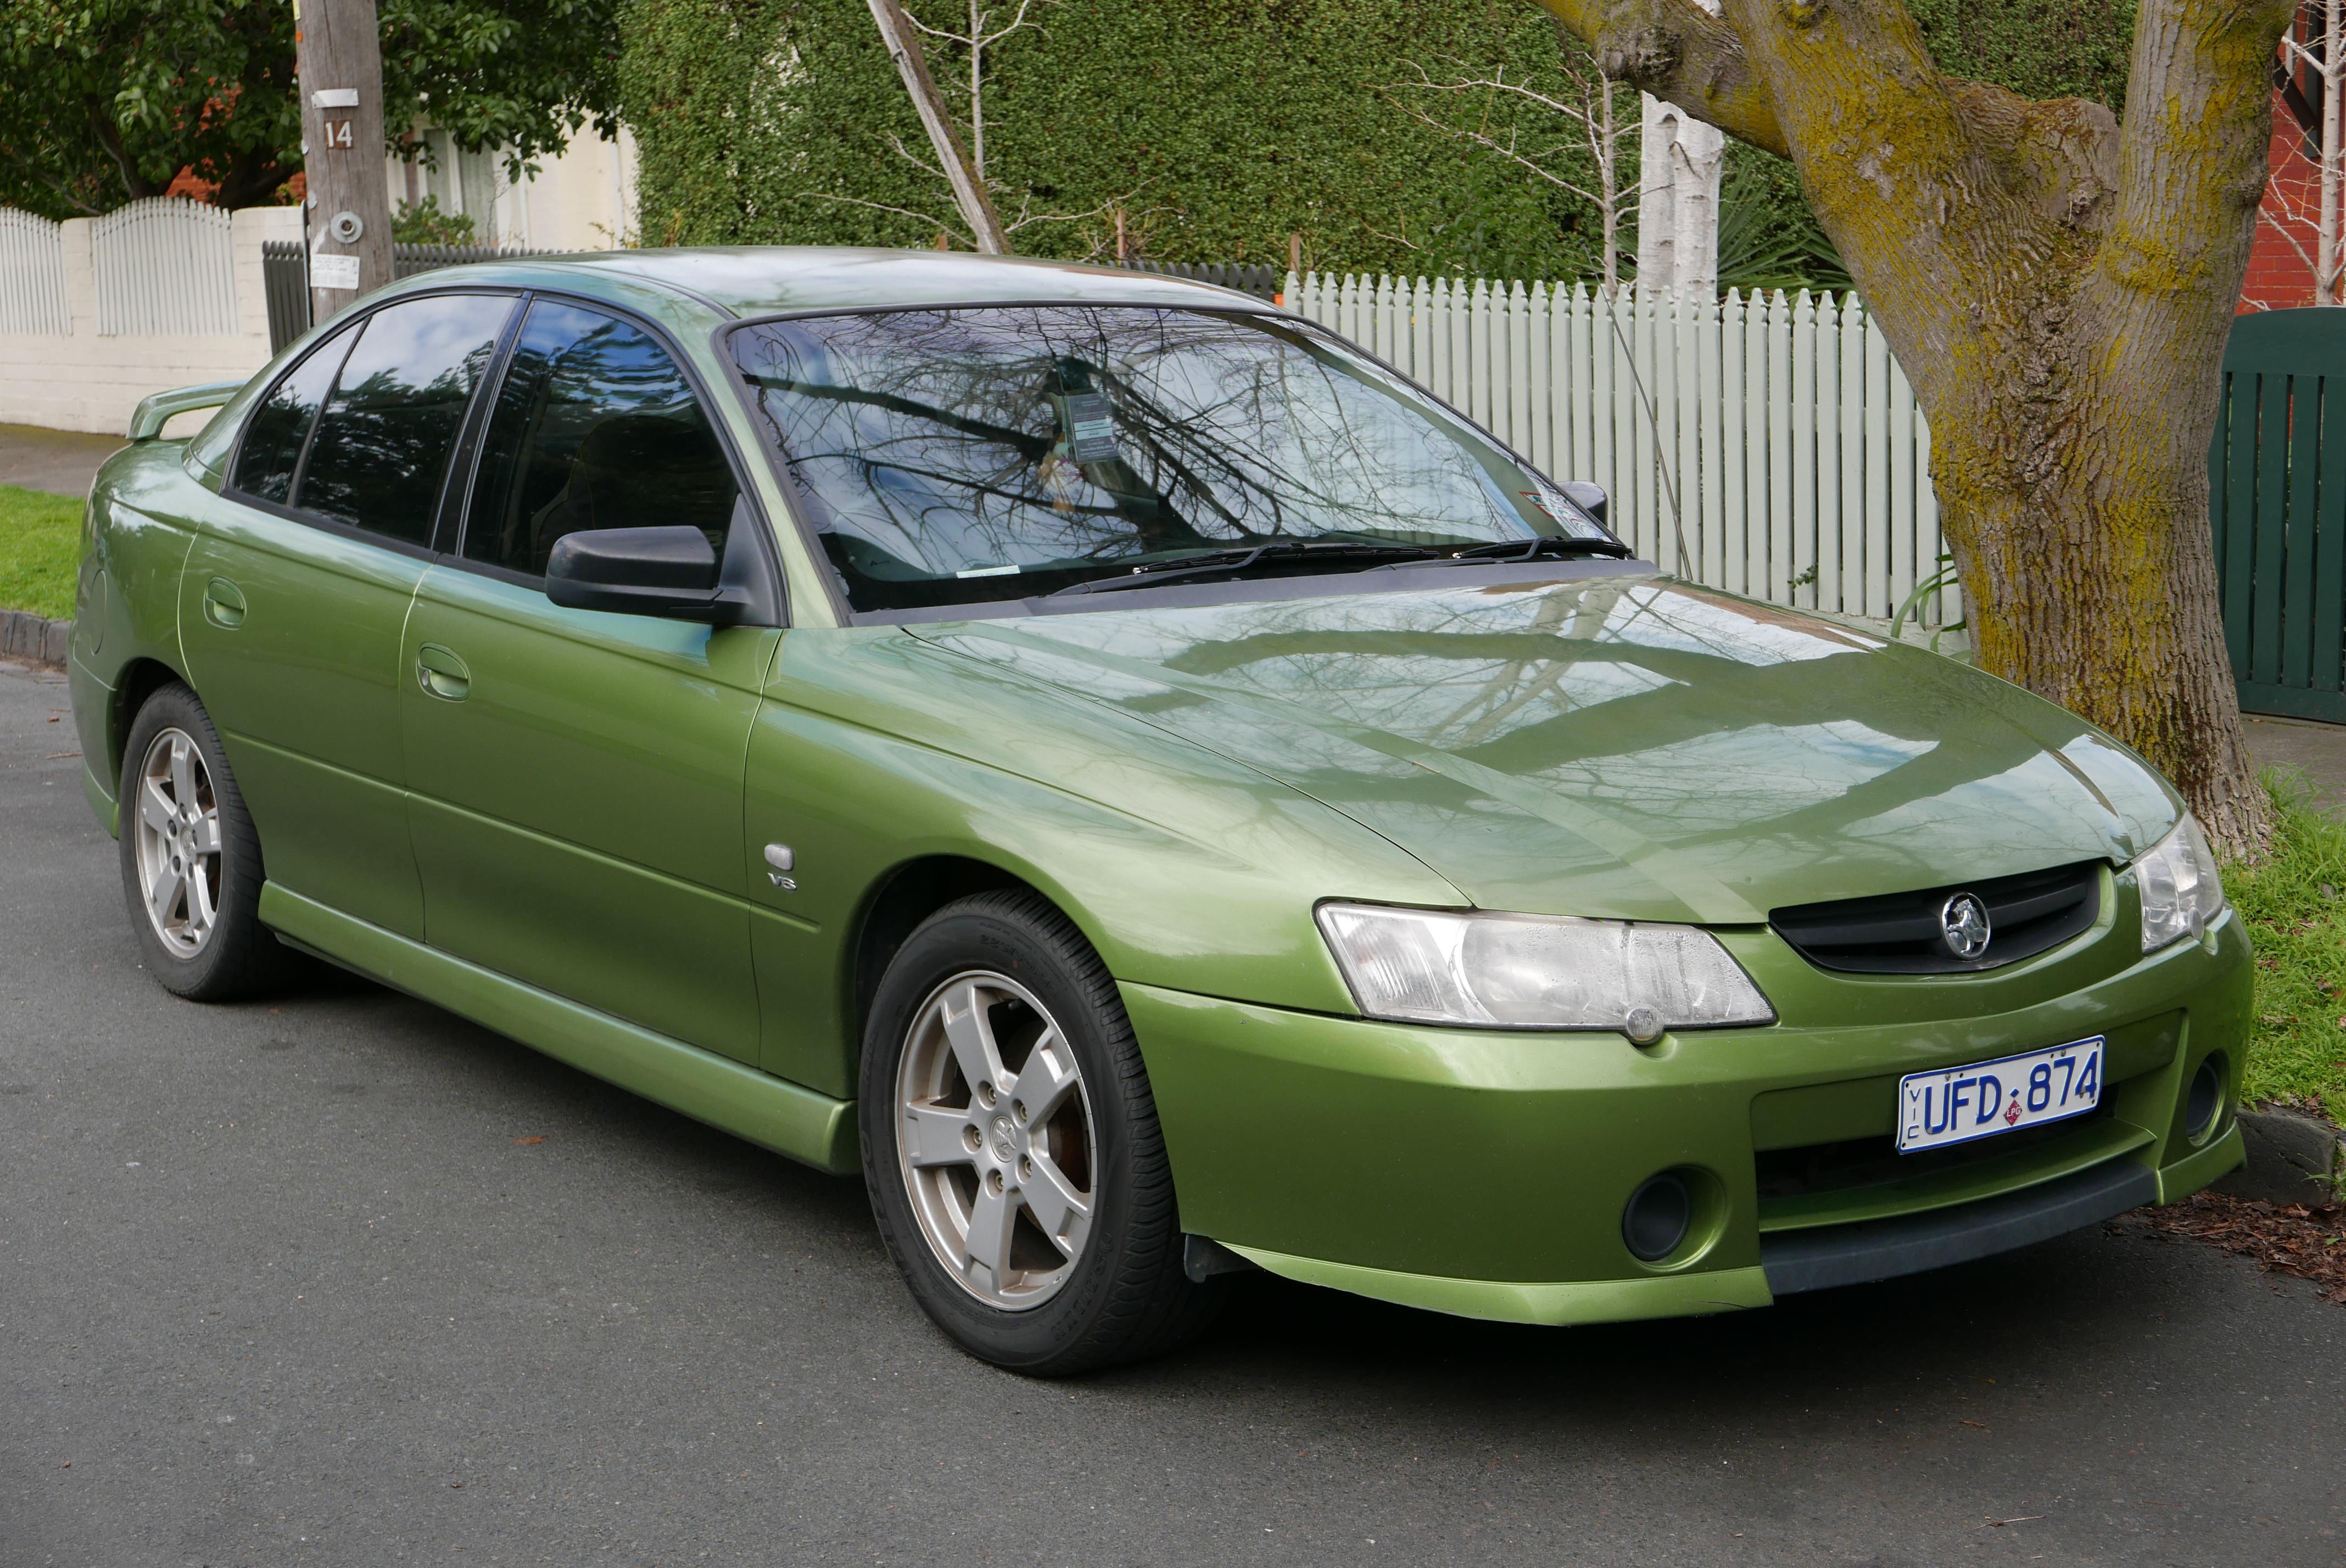 Picture of Holden Commodore SS